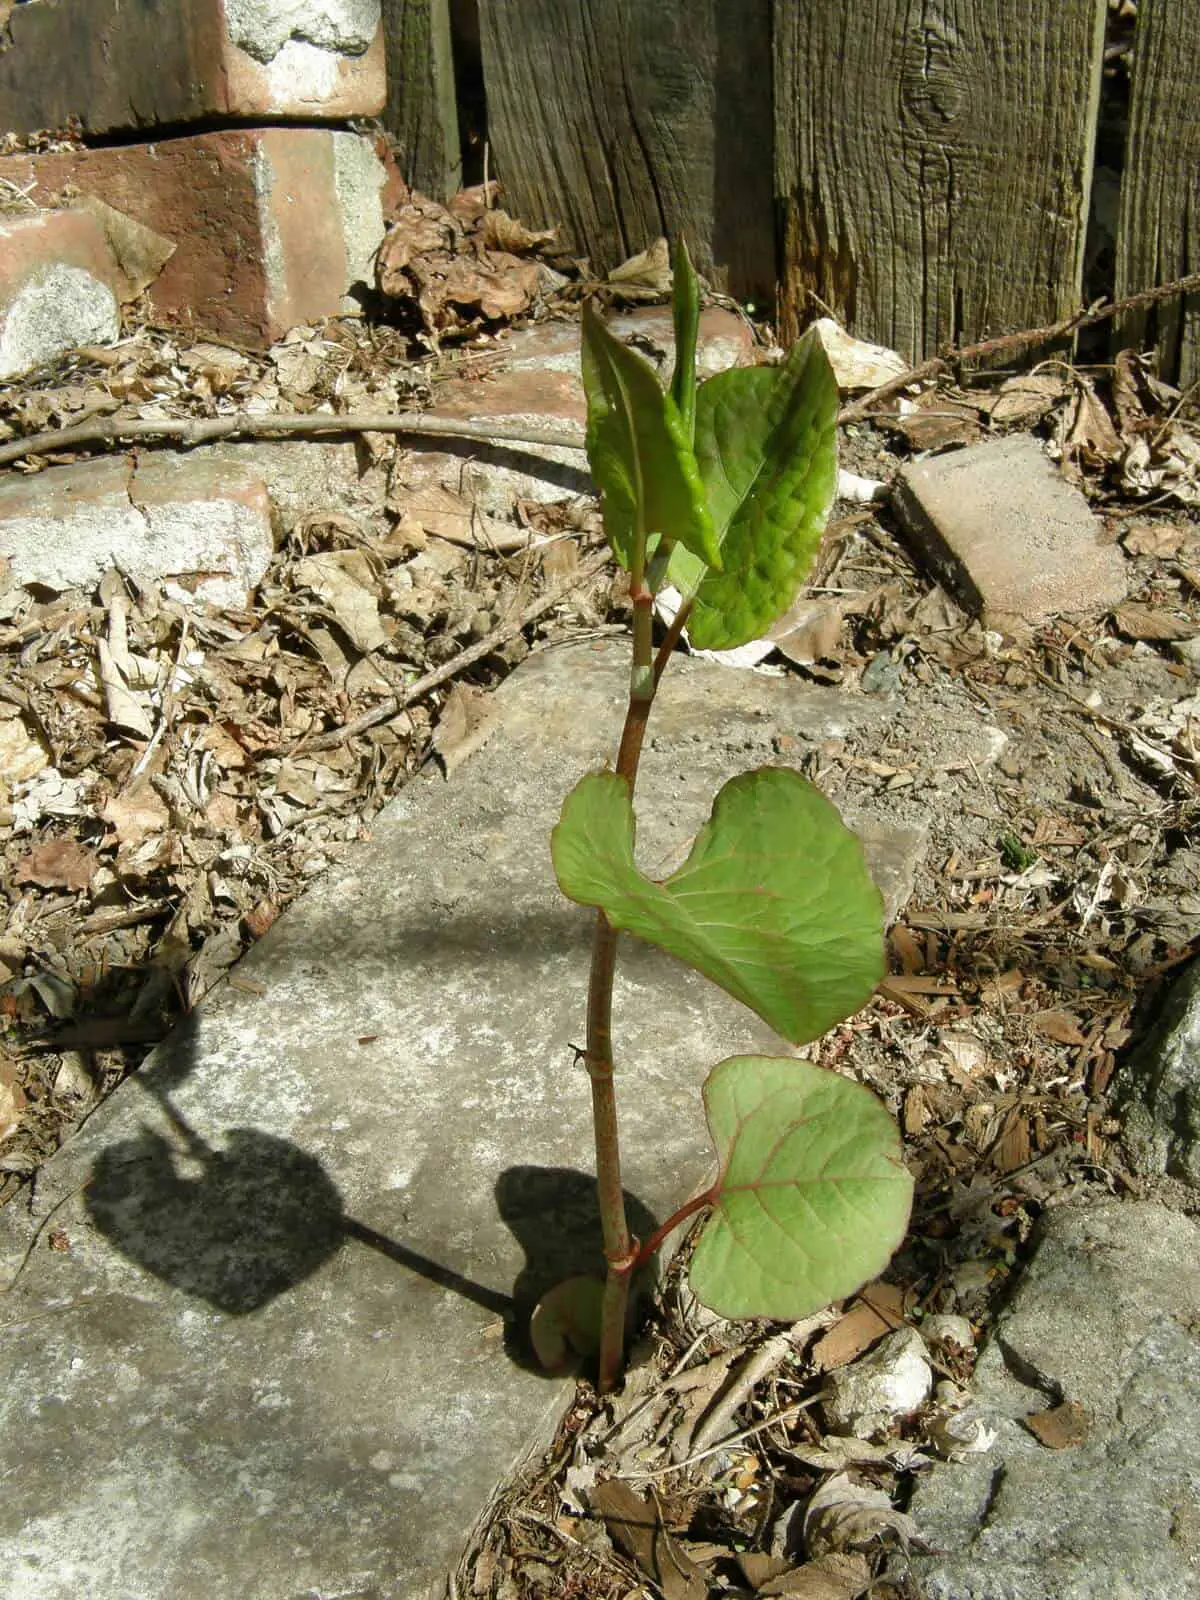 Japanese knotweed grows excessively on your property